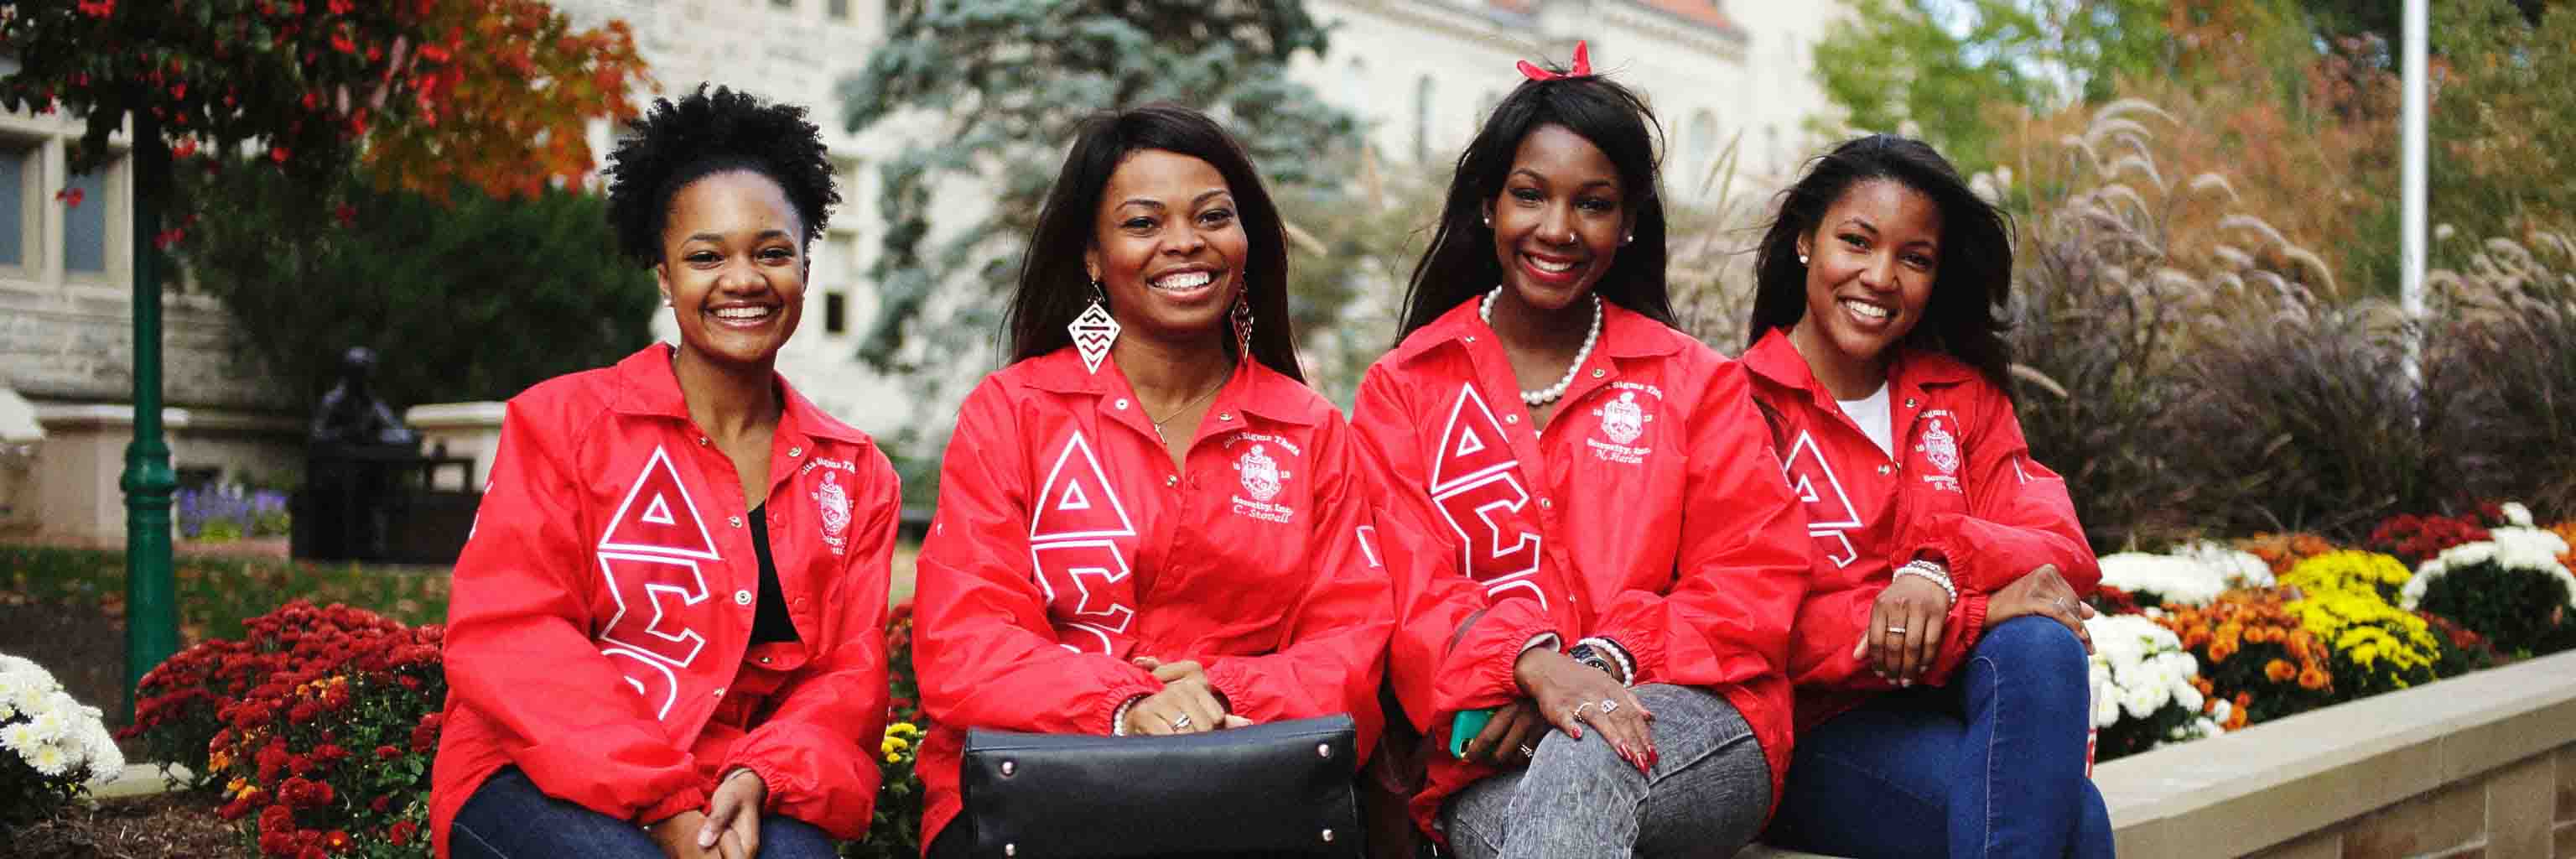 Four African American women in sorority jackets sit smiling on a bench.